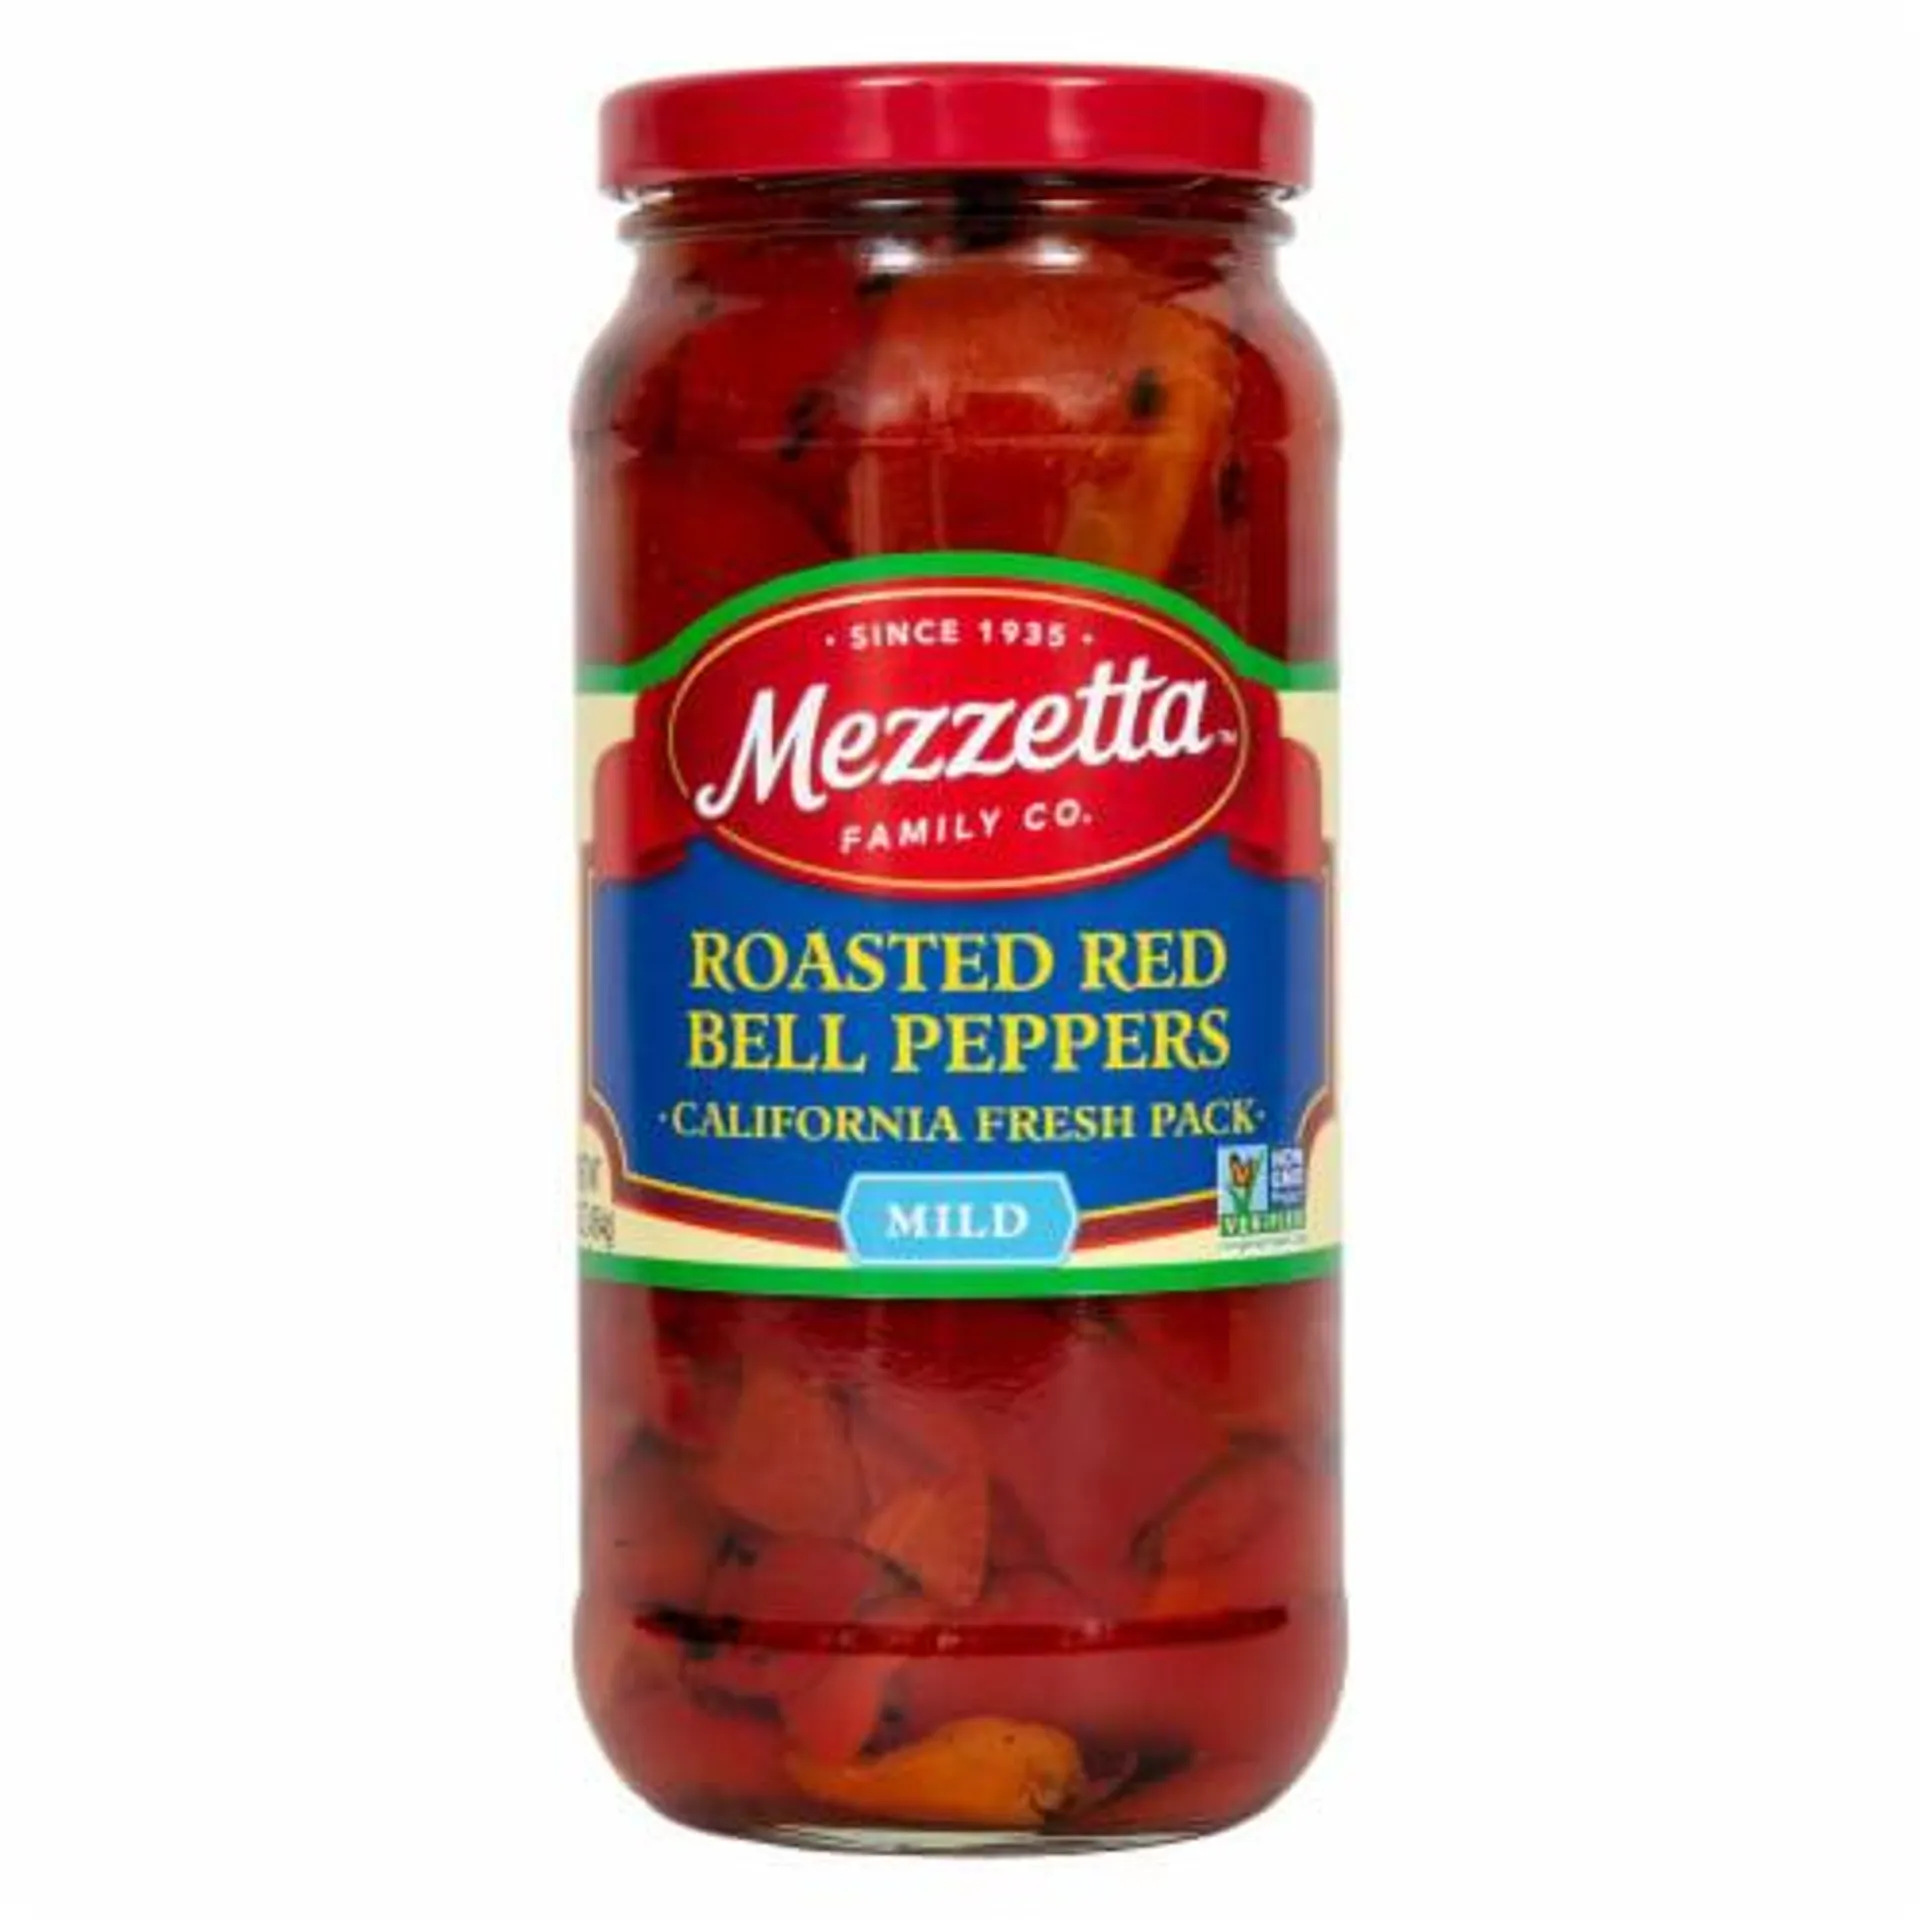 Mezzetta Roasted Red Bell Peppers (Pack of 2)